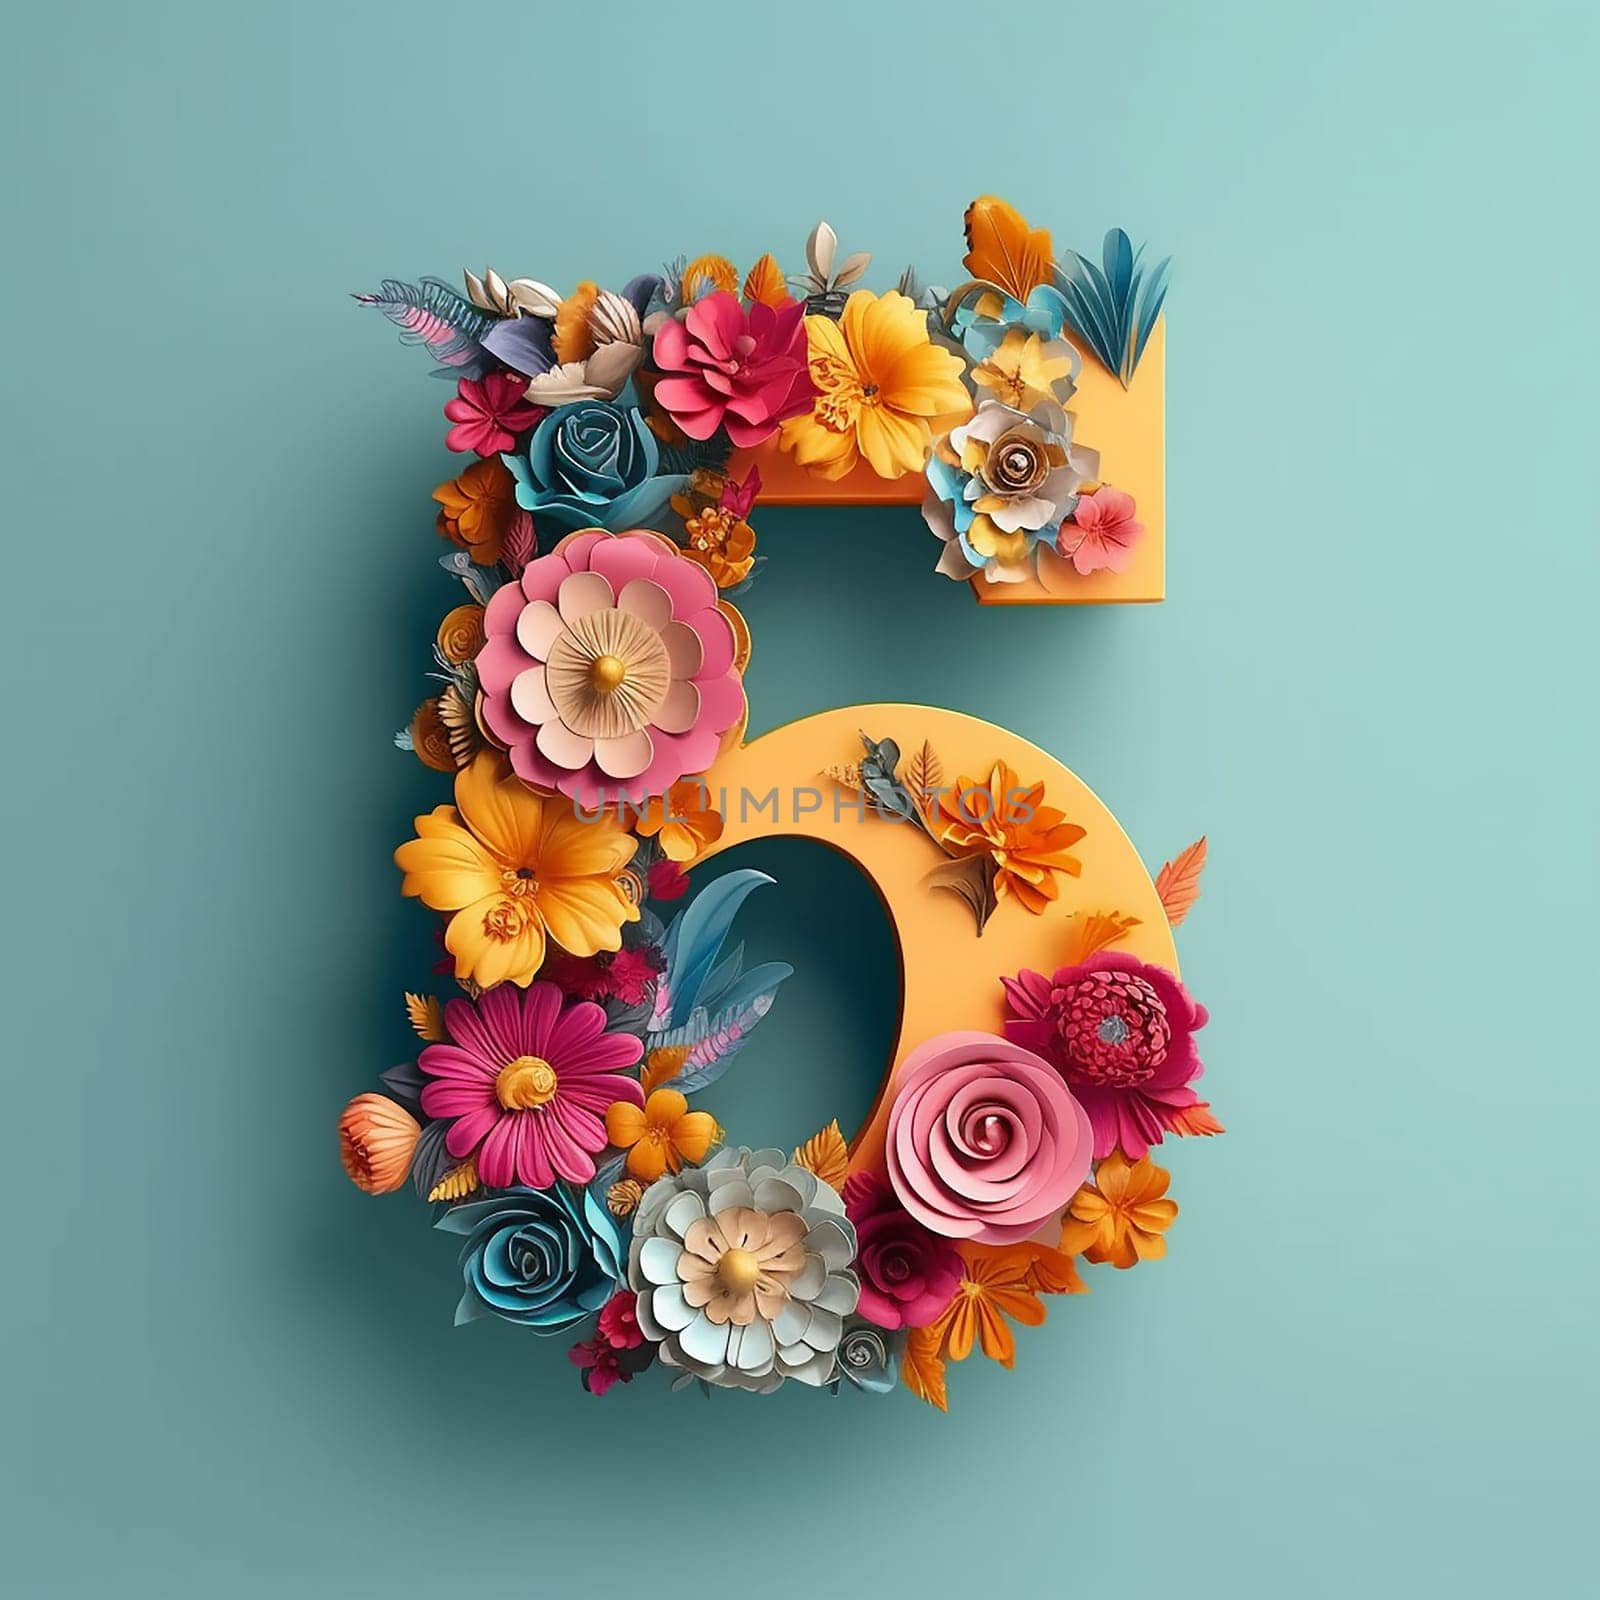 Floral decorated number five on teal background